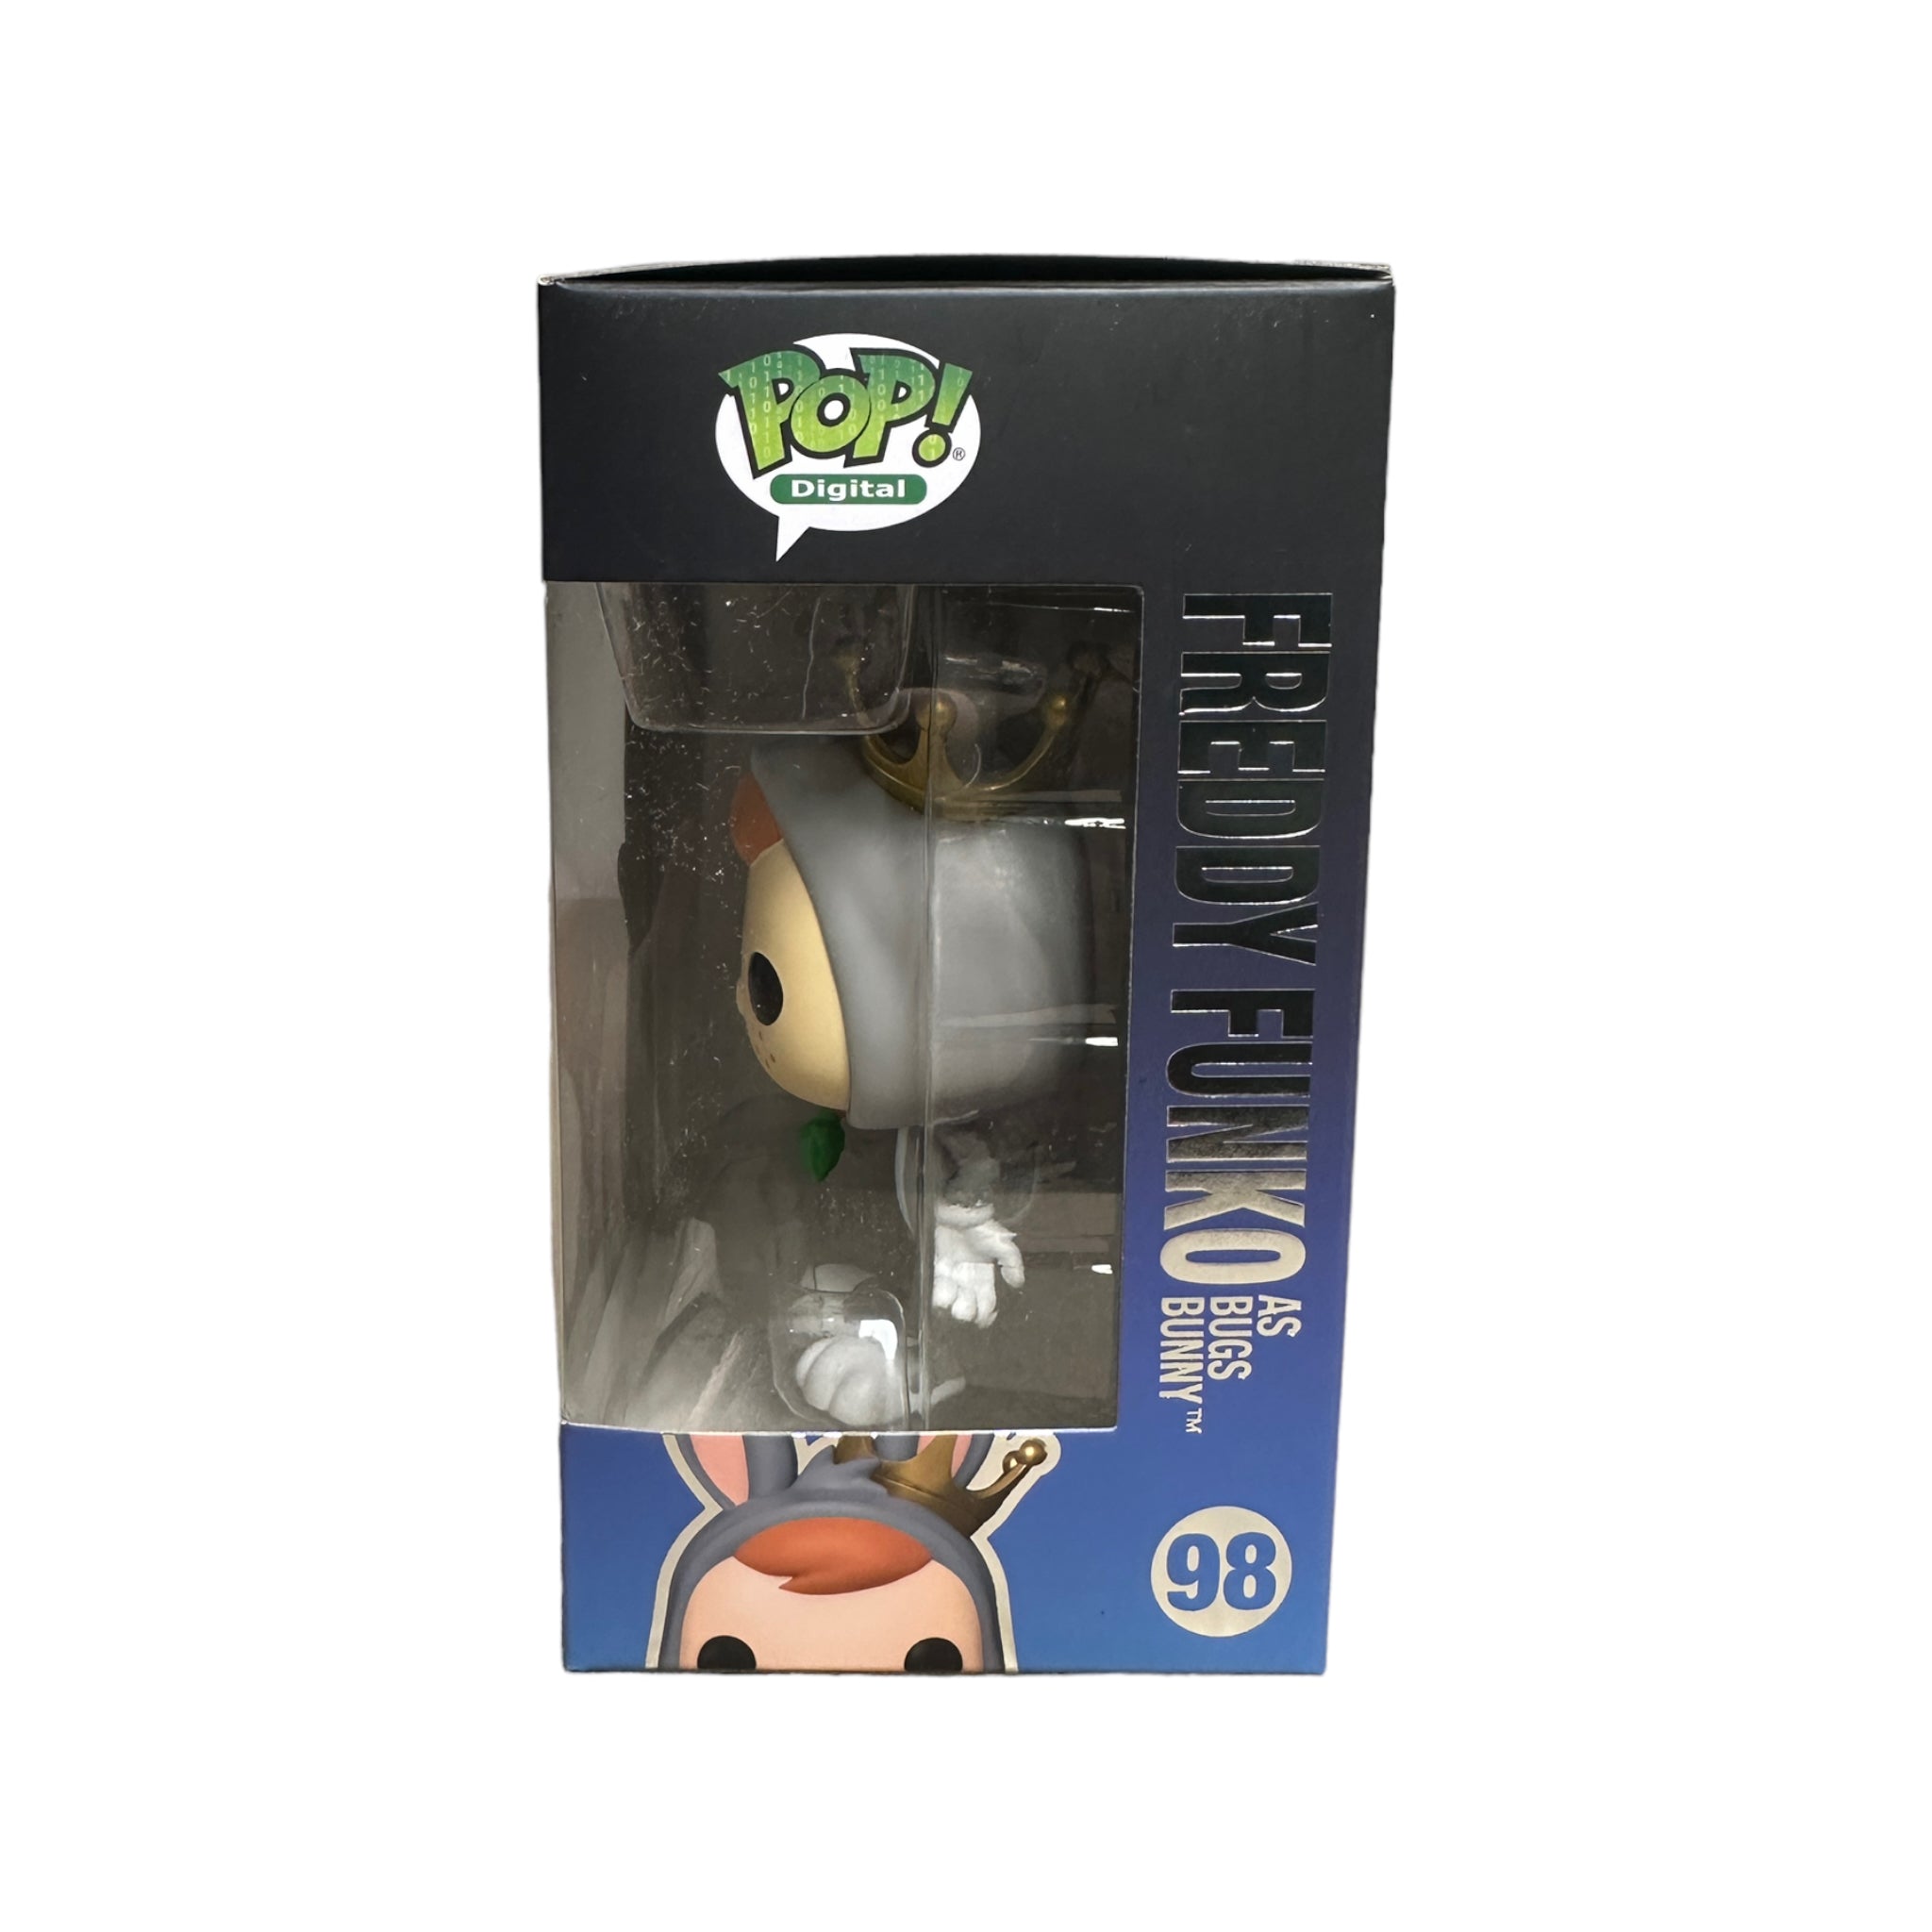 Freddy Funko as Bugs Bunny #98 Funko Pop! - Looney Tunes - NFT Release Exclusive LE3000 Pcs - Condition 9/10